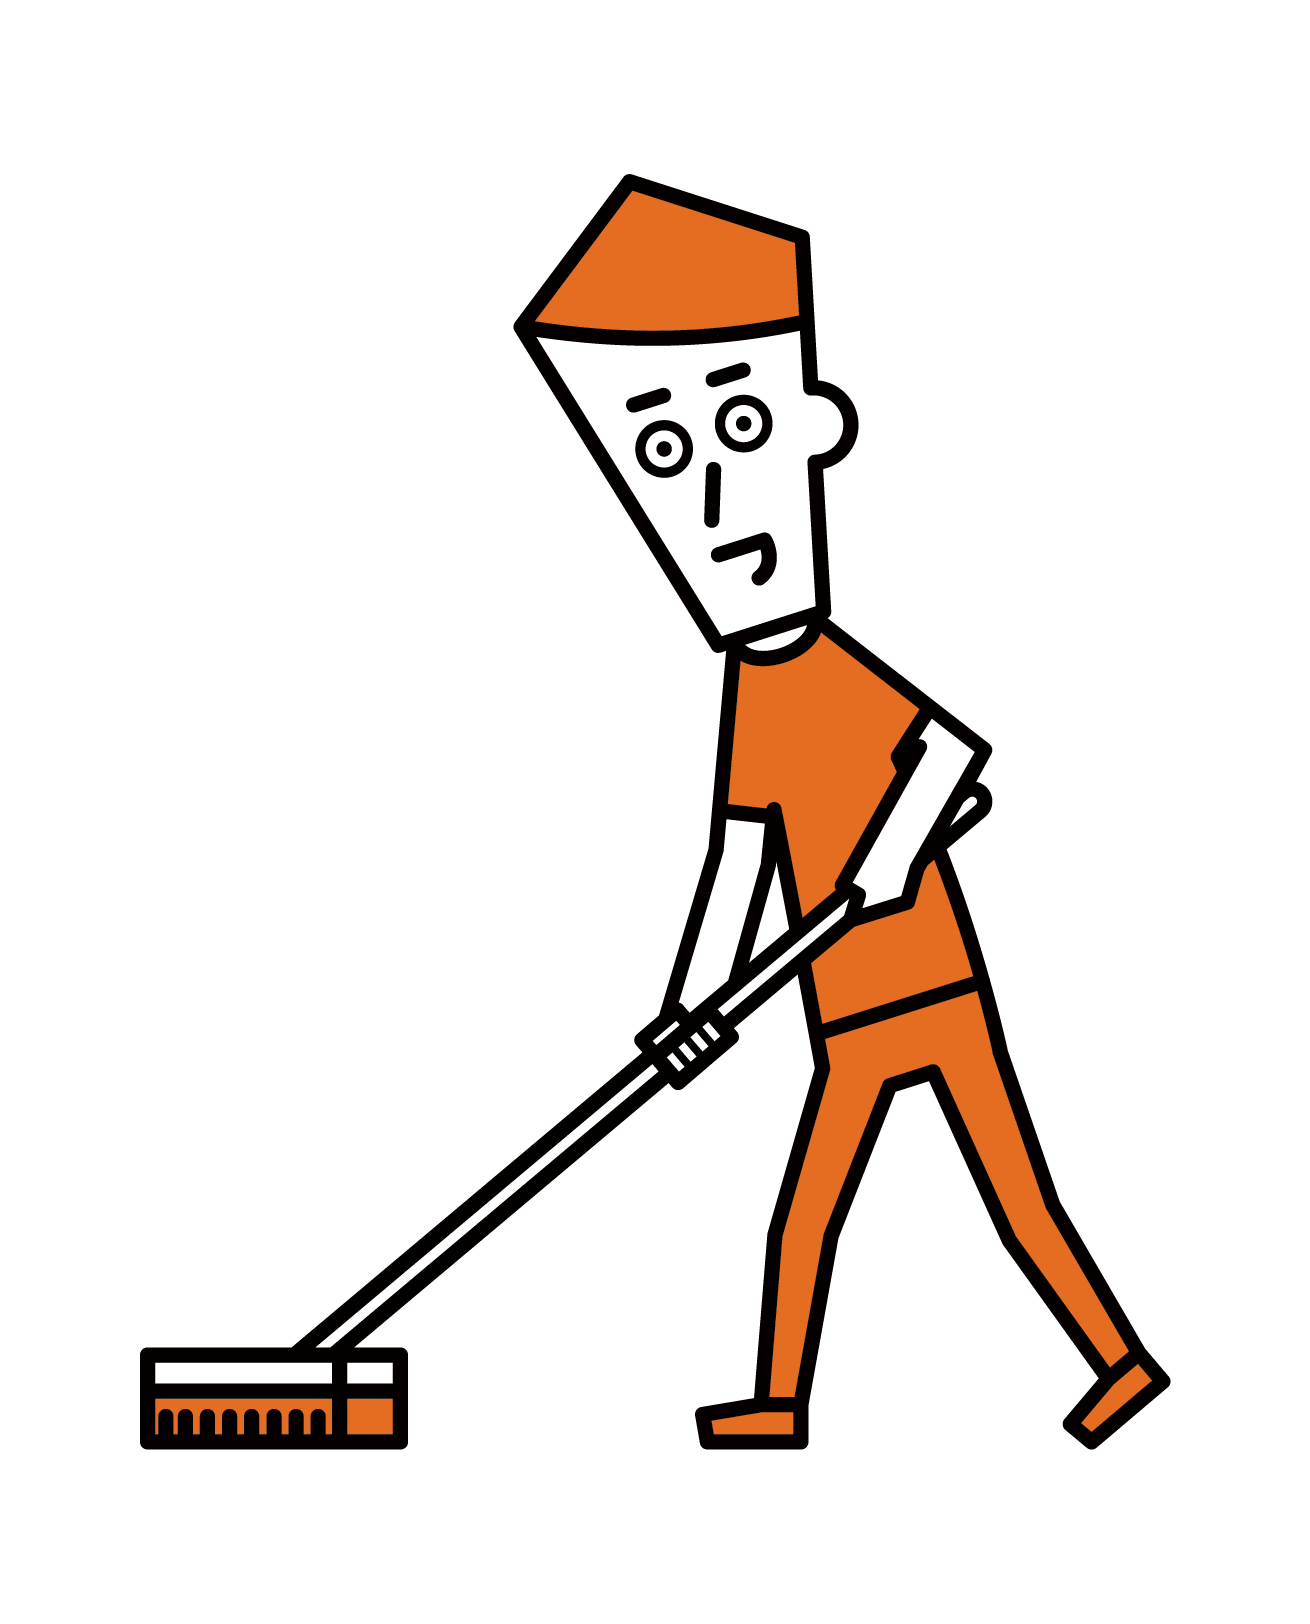 Illustration of a man cleaning with a brush